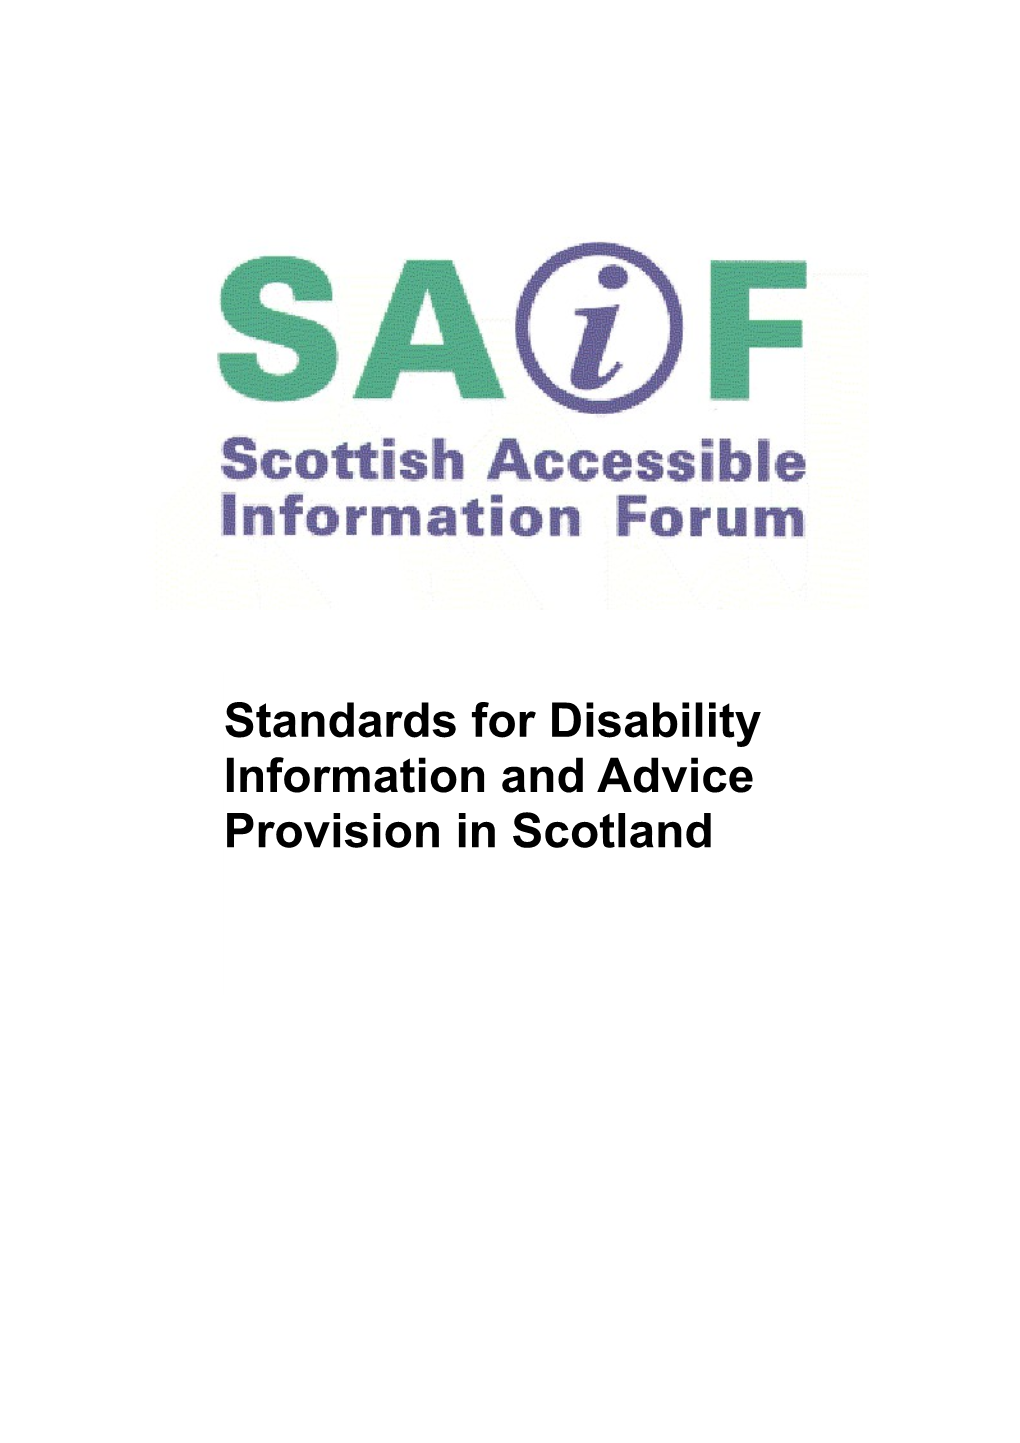 SAIF Standards for Disability Information and Advice Provision in Scotland 2007